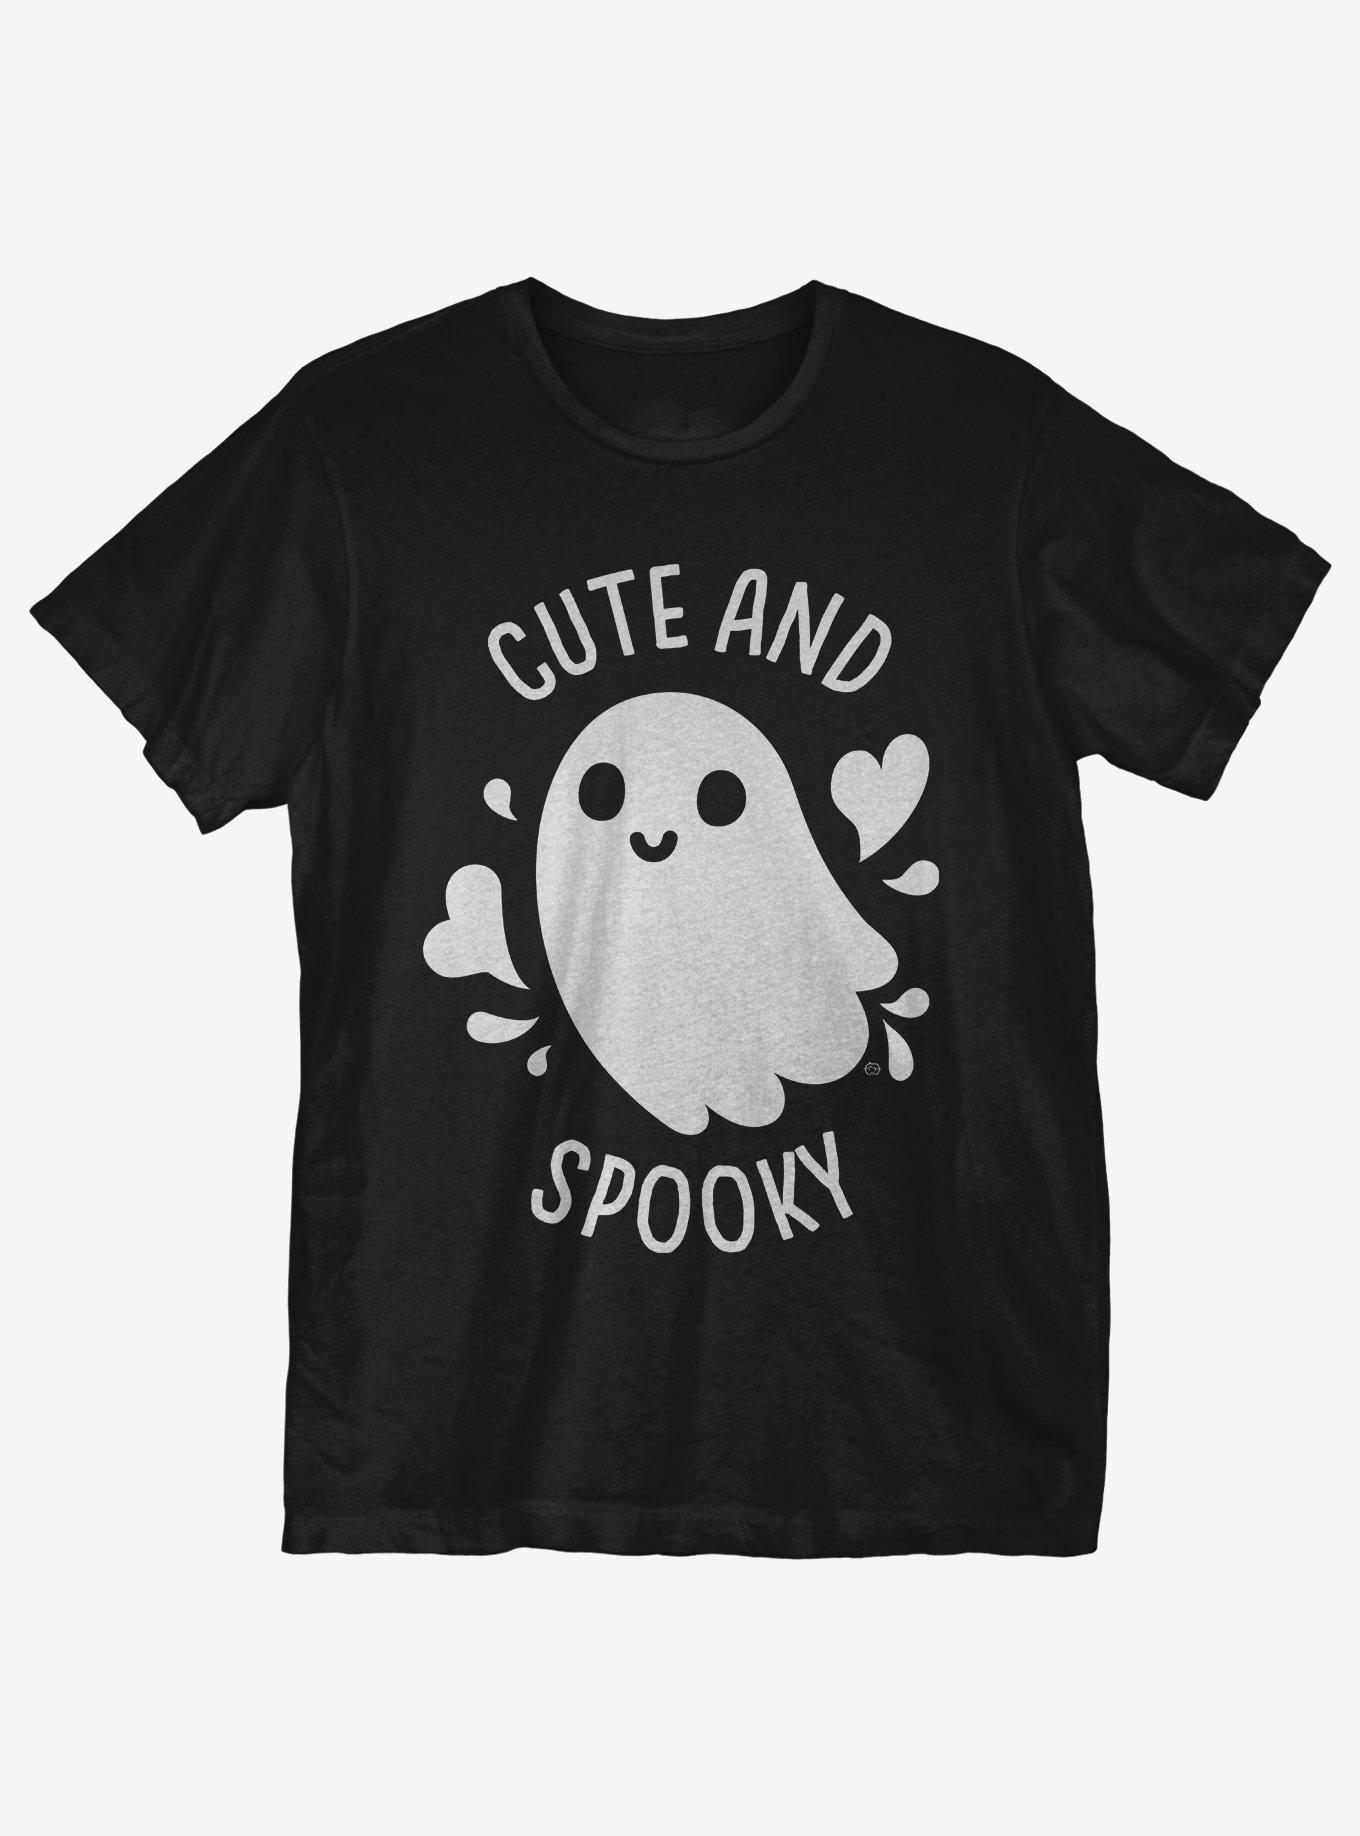 Cute and Spooky Ghost T-Shirt, BLACK, hi-res